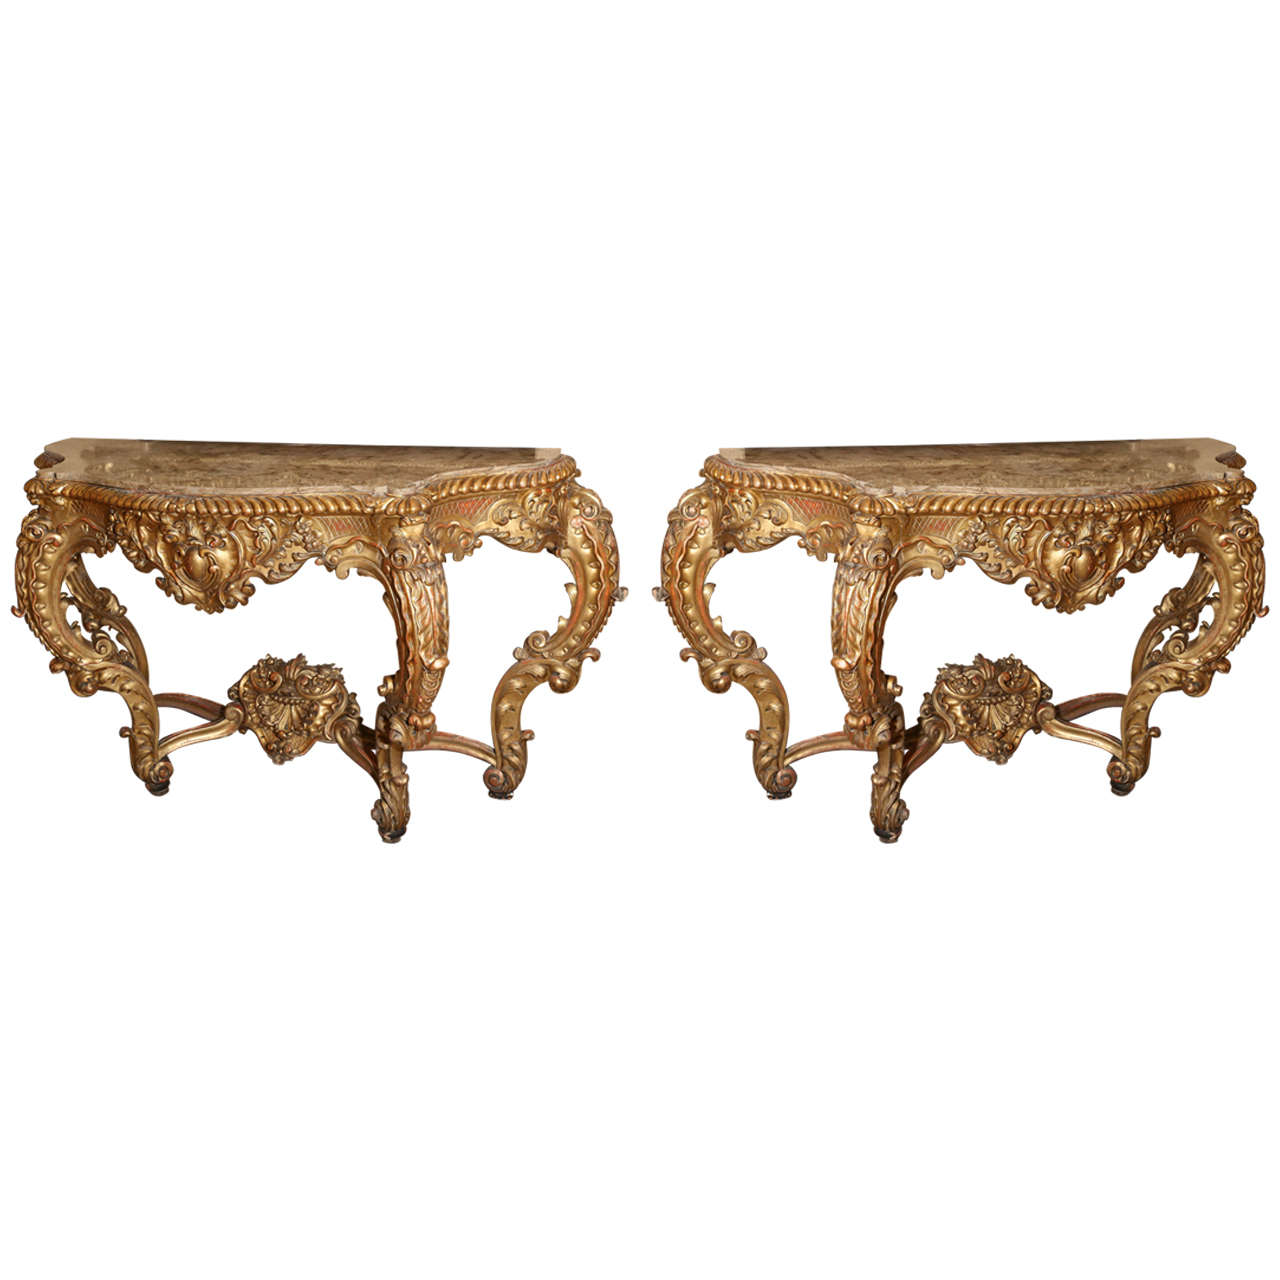 A pair of 18th Century Italian Wall Consoles For Sale at 1stdibs